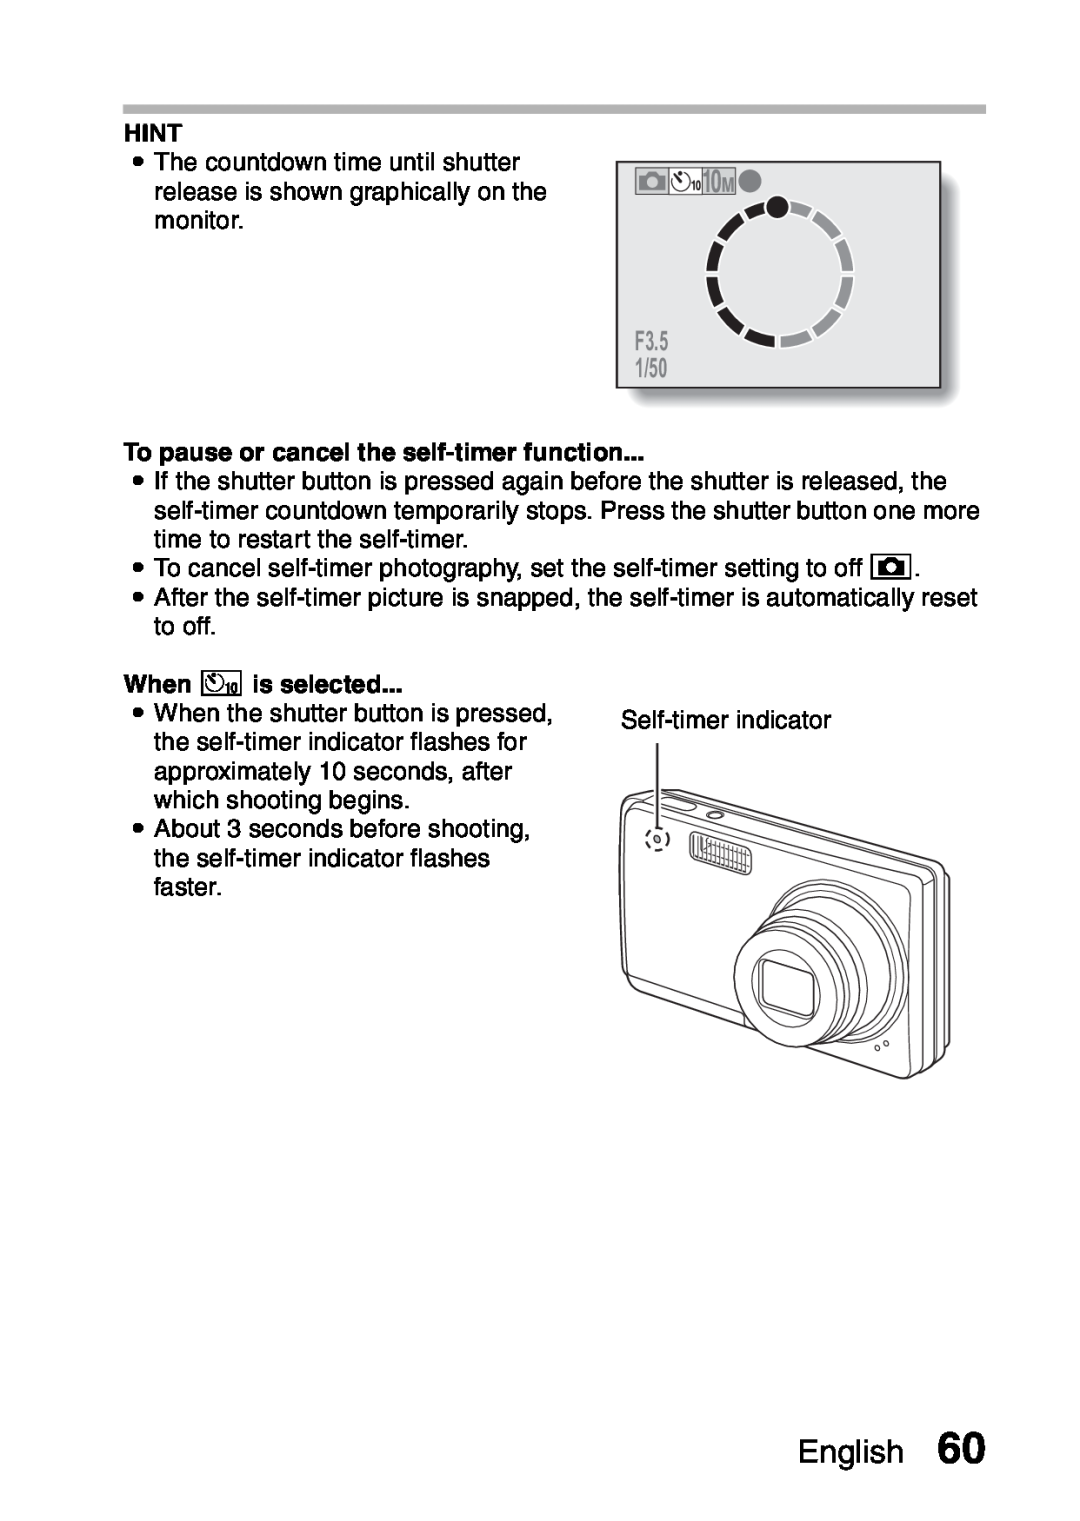 Samsung R50 instruction manual English, F3.5 1/50, Hint, To pause or cancel the self-timer function, When xis selected 